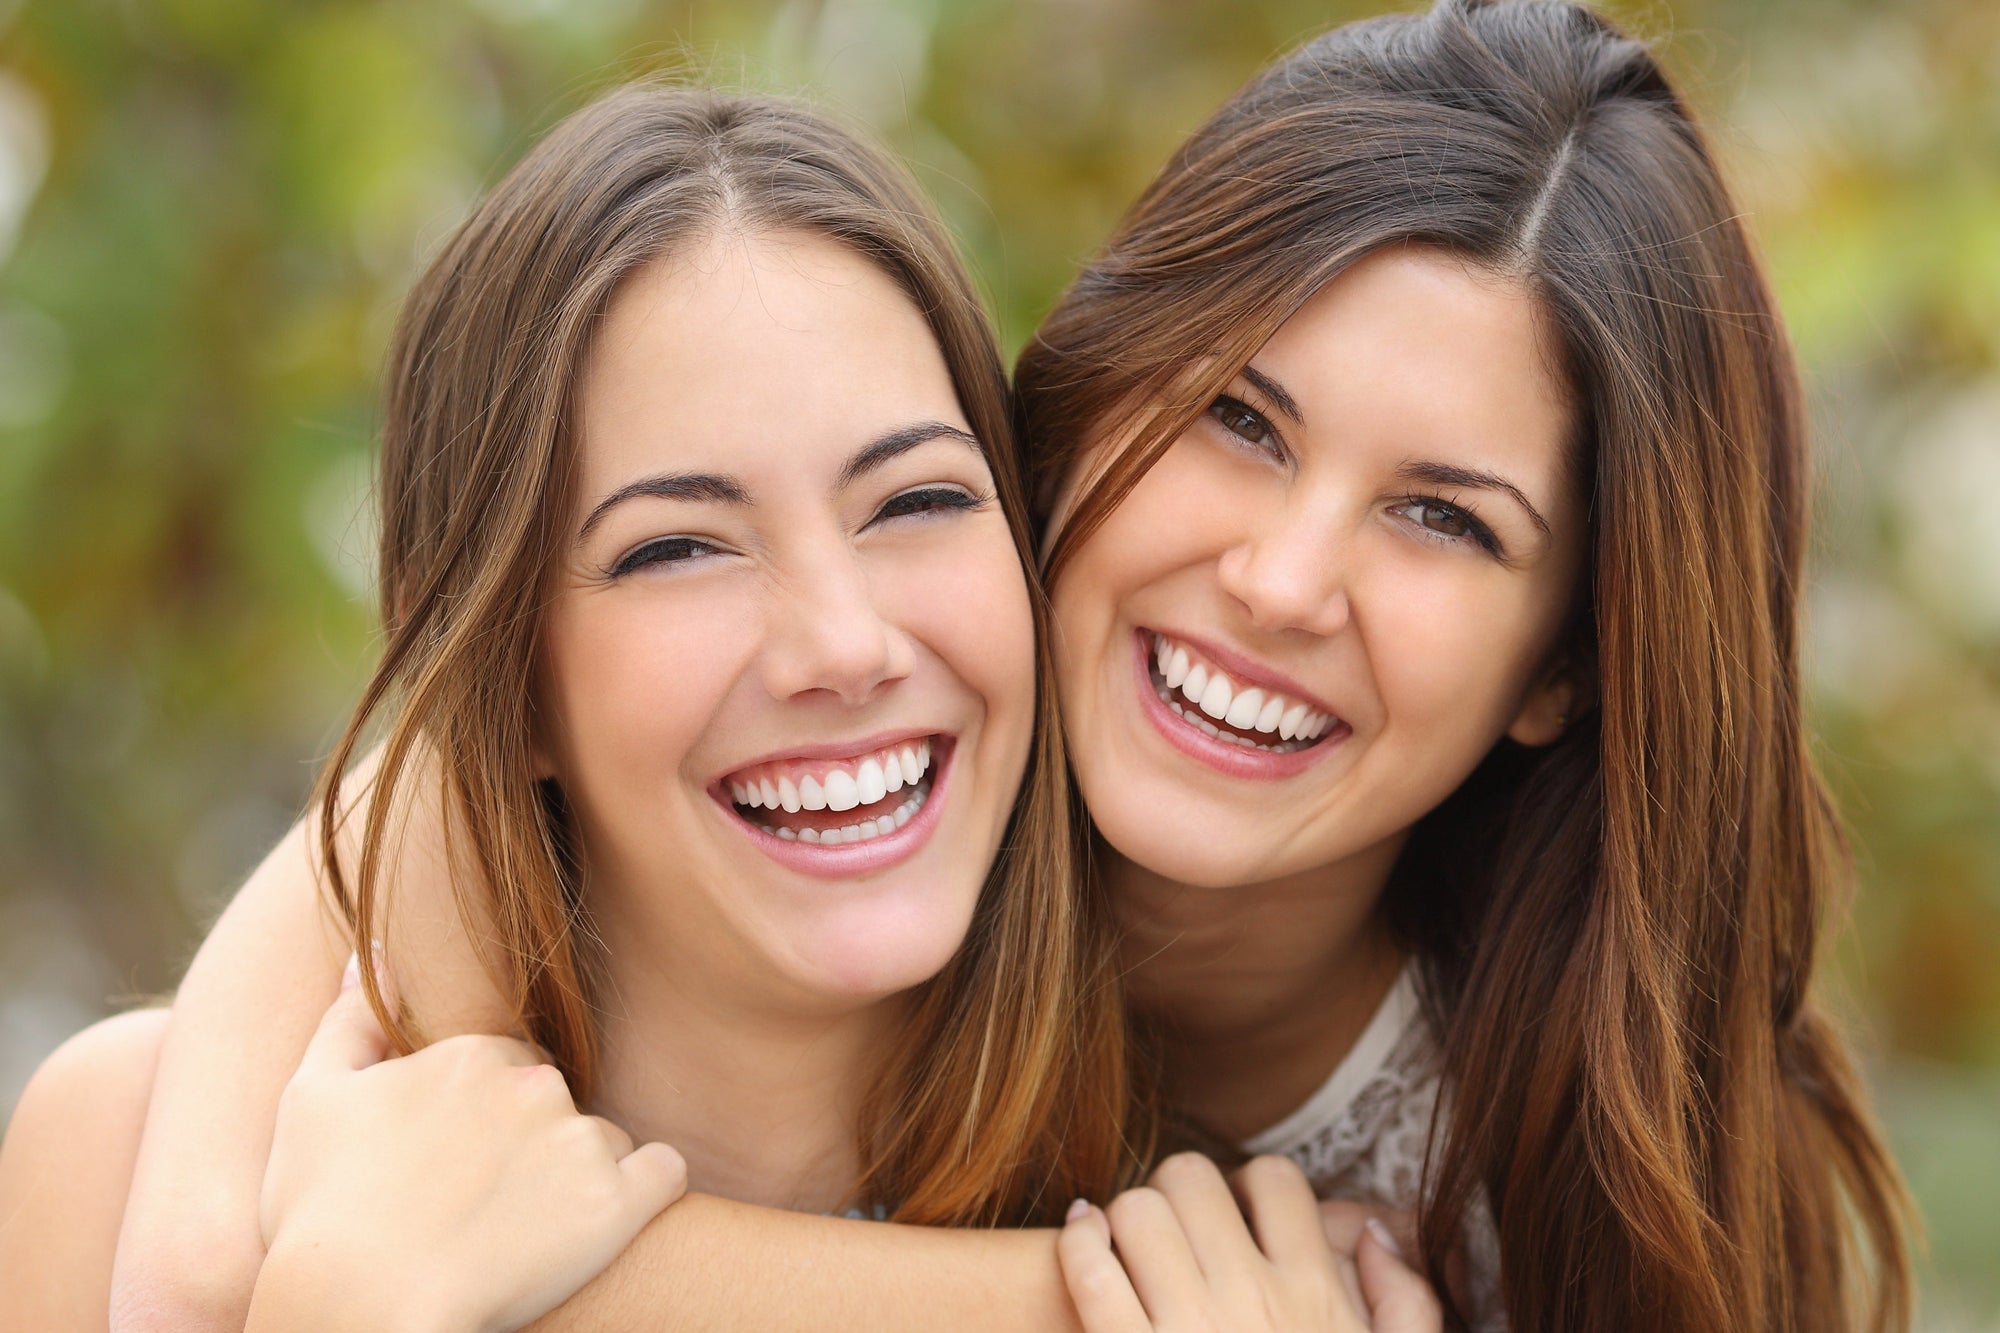 Clear Aligners Vs Braces - Which one is a better choice? | NewSmile Canada